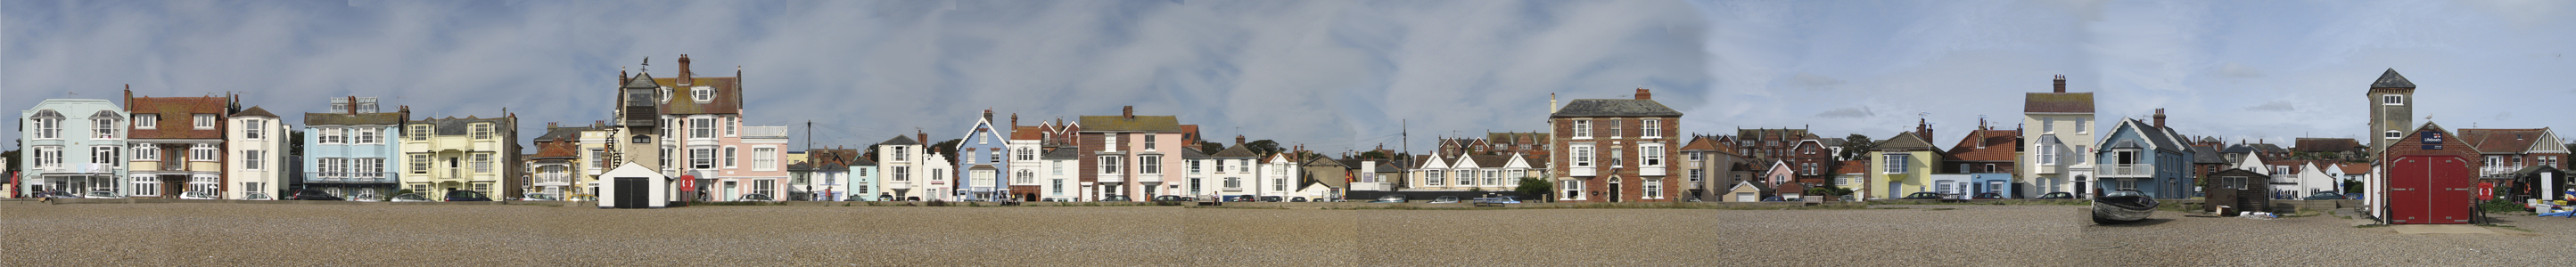 Aldeburgh Sea Front the Old Lookout